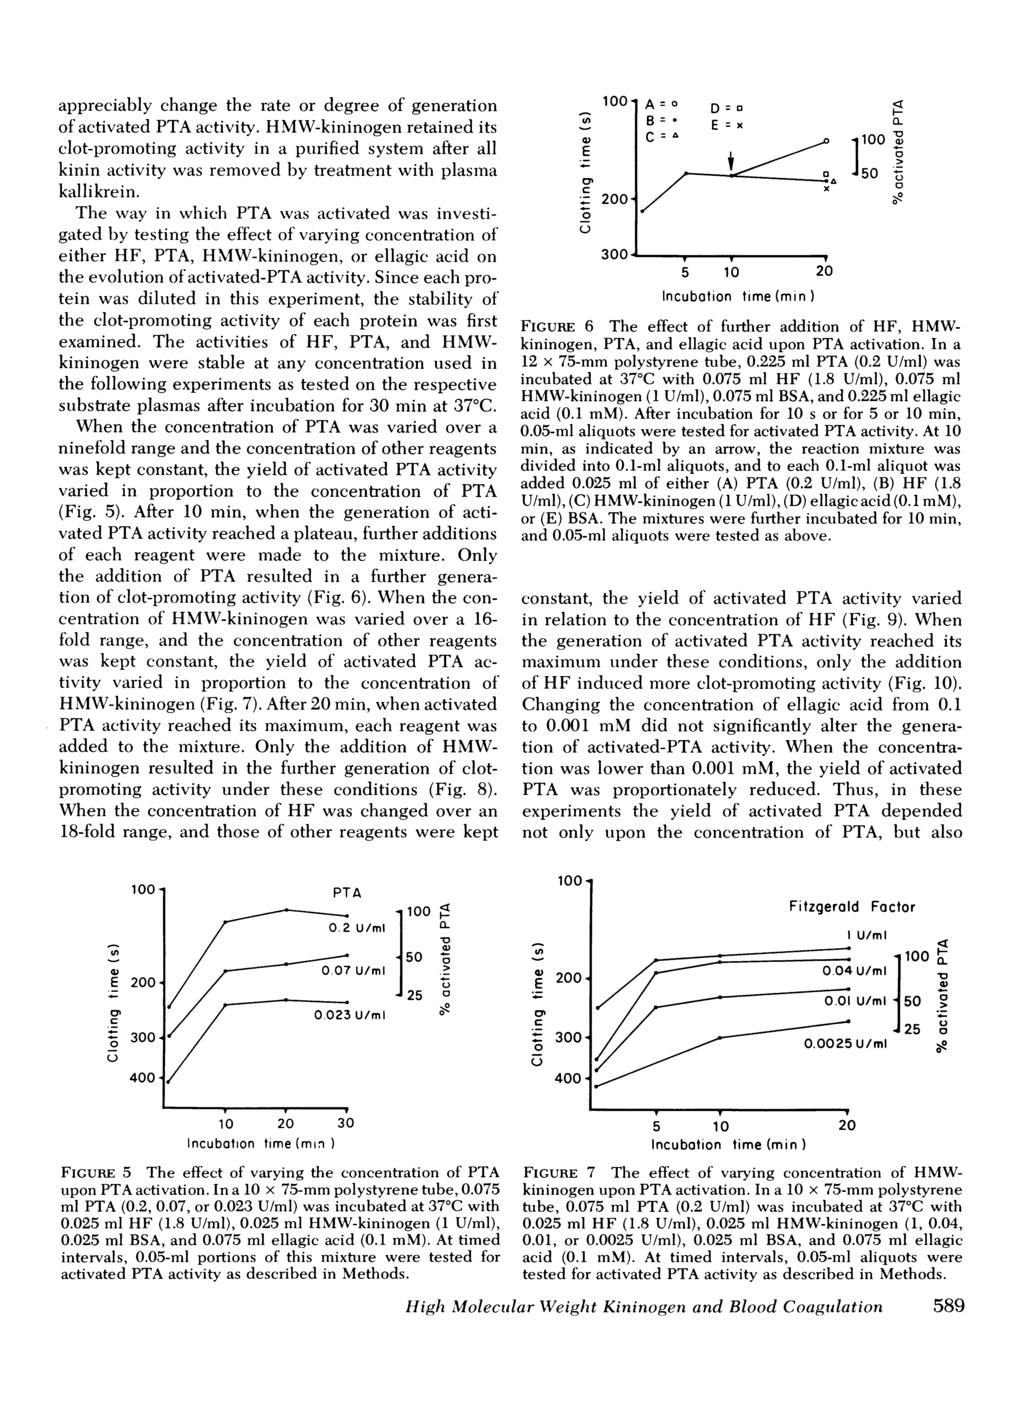 Downloaded from http://www.jci.org on January 7, 218. https://doi.org/1.1172/jci1881 appreciably change the rate or degree of generation of activated PTA activity.